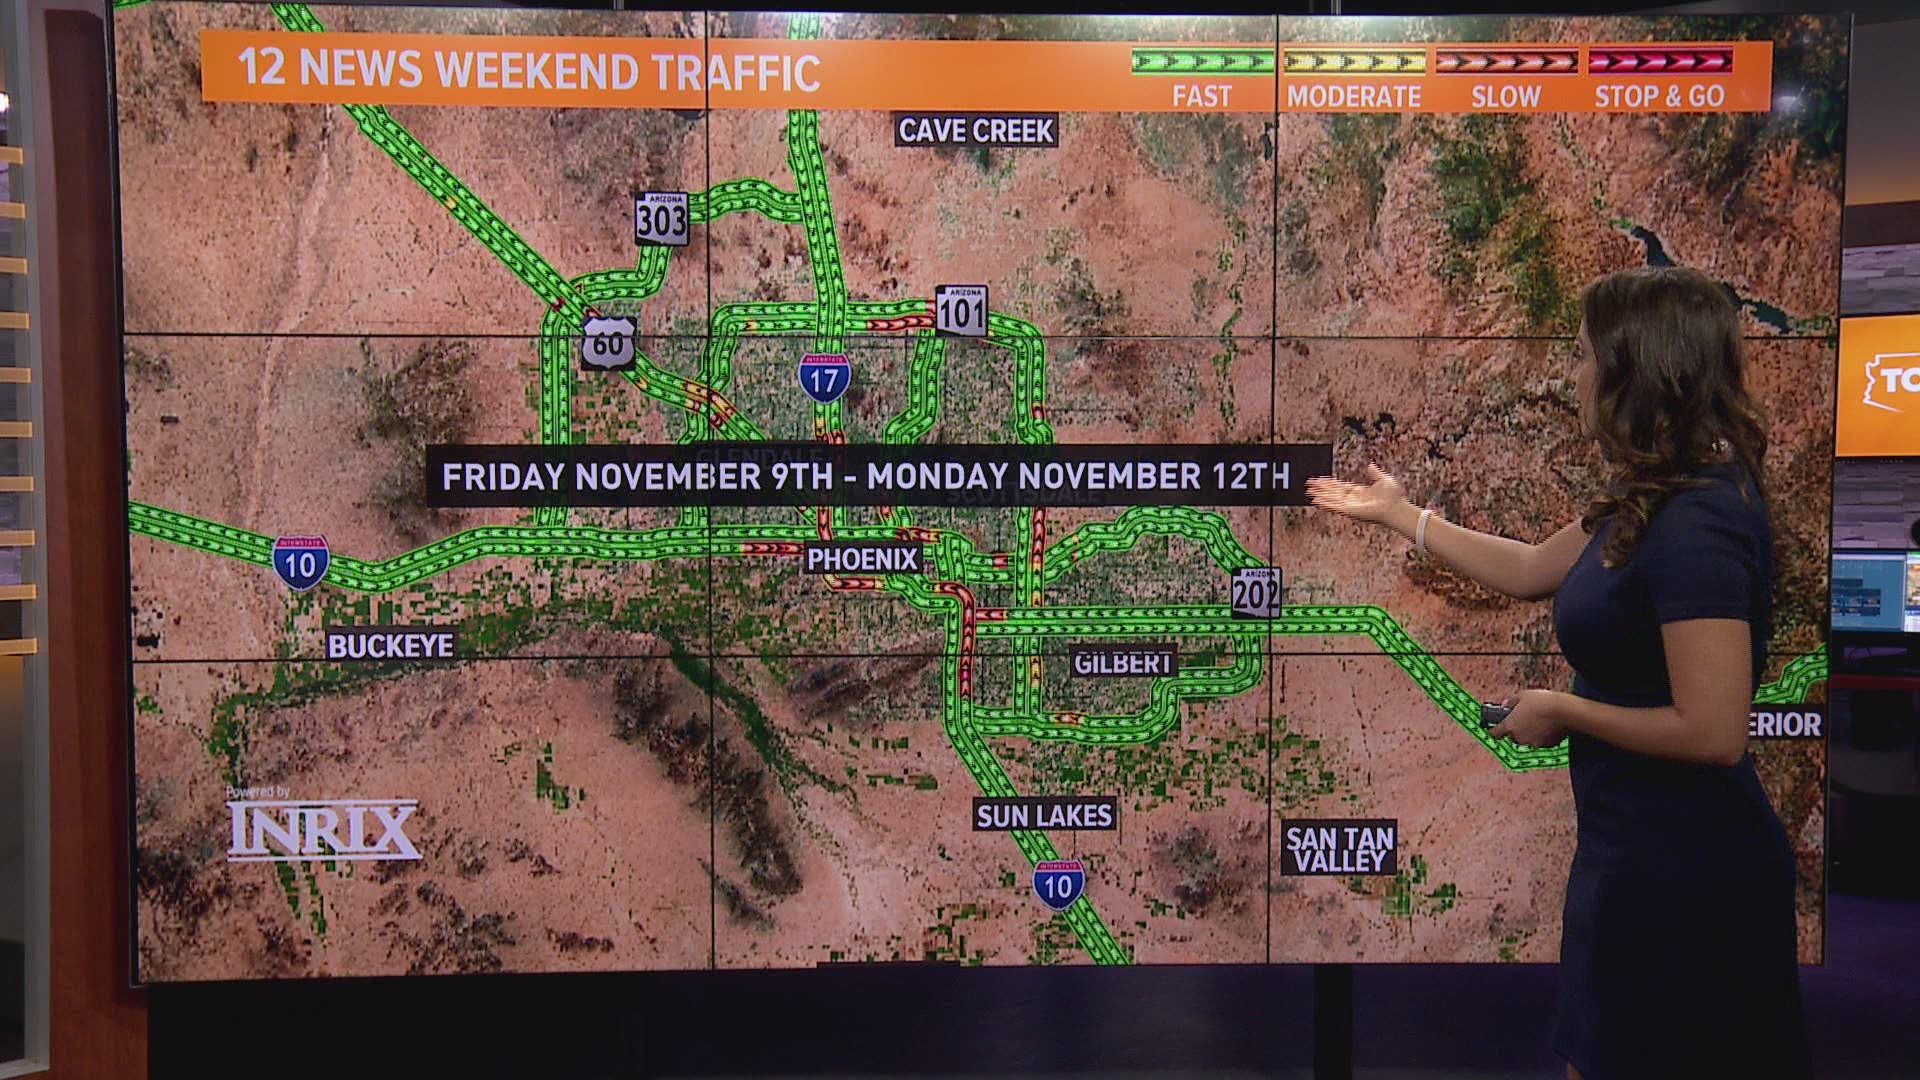 Here's your weekend traffic outlook for November 9 - November 12.